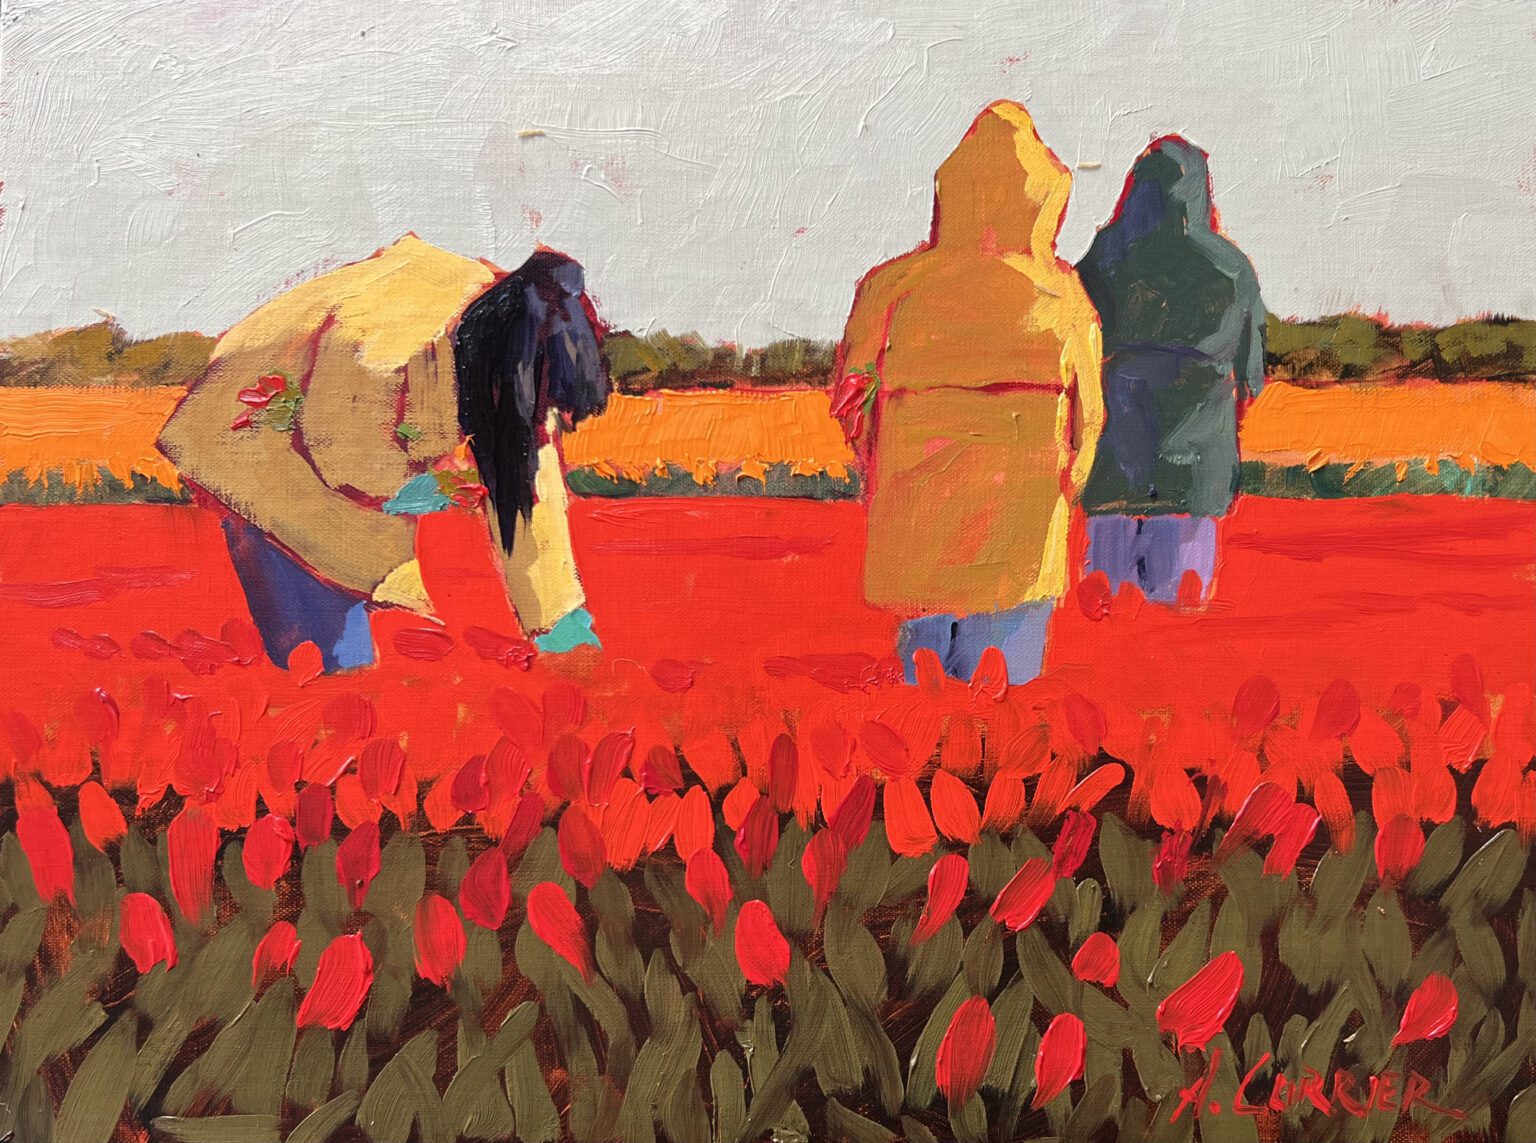 Alfred Currier's “Skagit Pickers” will be one of the paintings on display at an opening reception featuring new works by Currier and Anne Schreivogl Friday